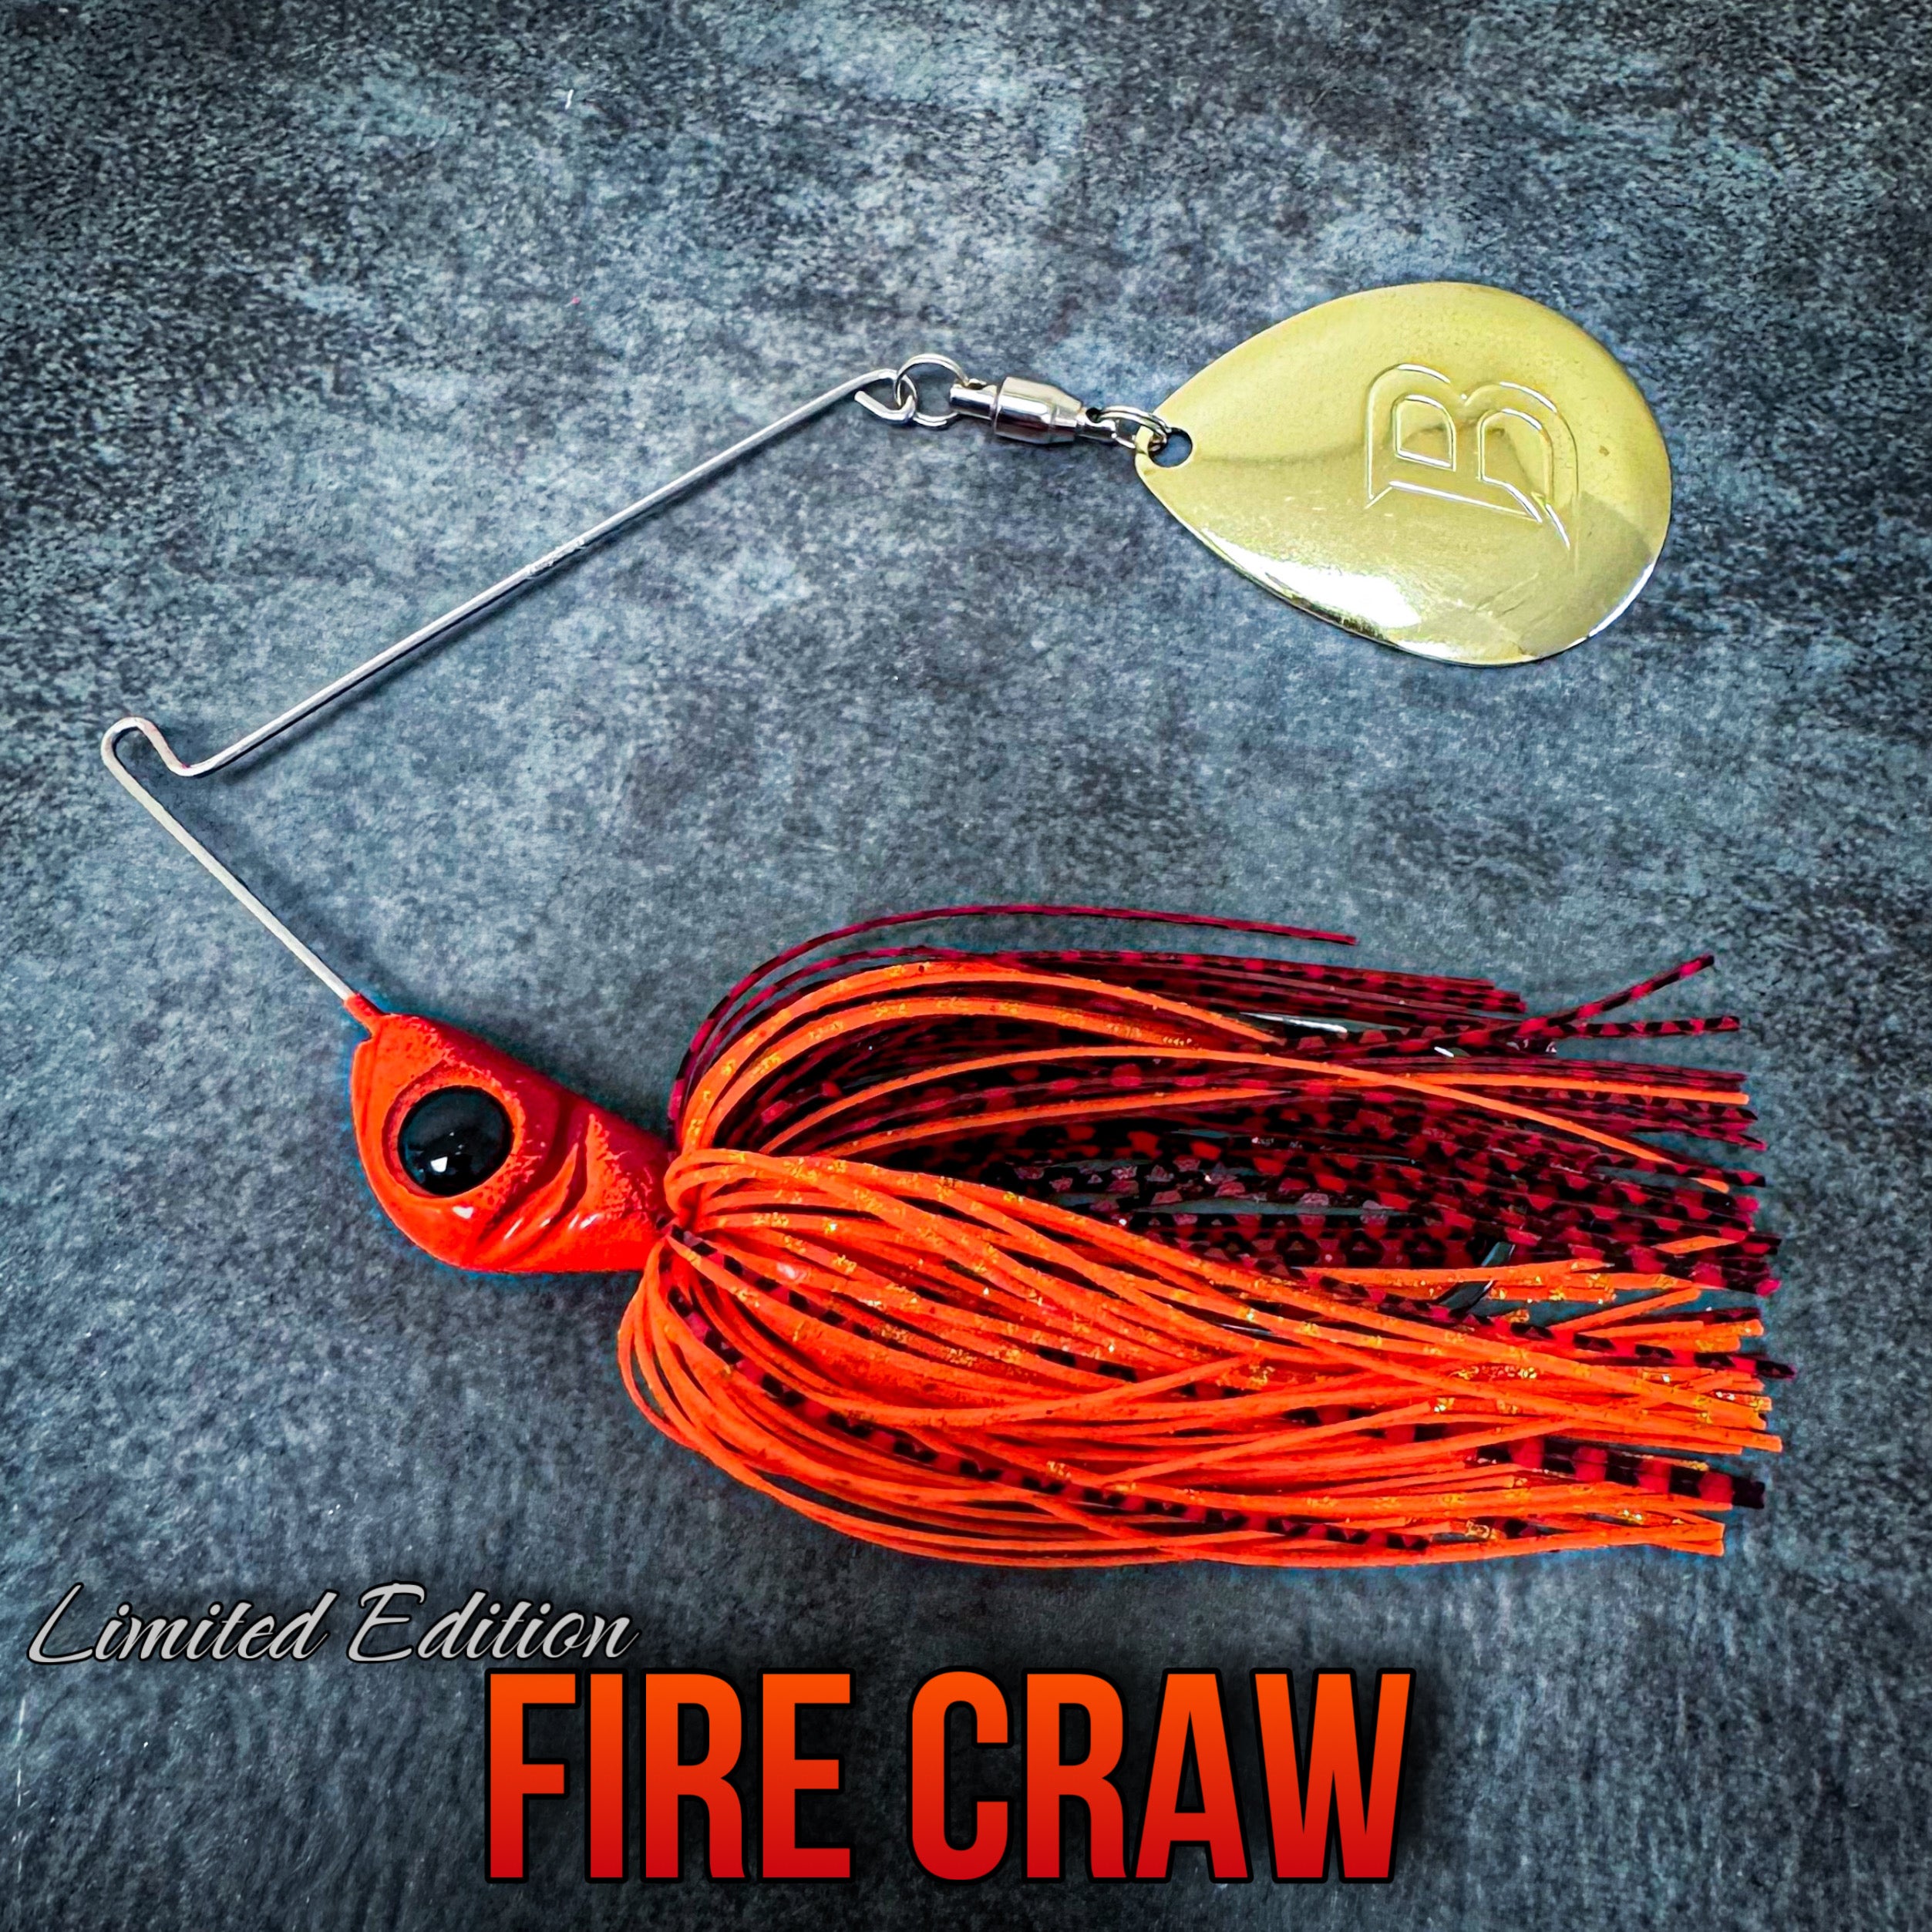 Limited Fire Craw Thump GOLD Blade - 5/8oz — Made to order please allow 1 week to ship